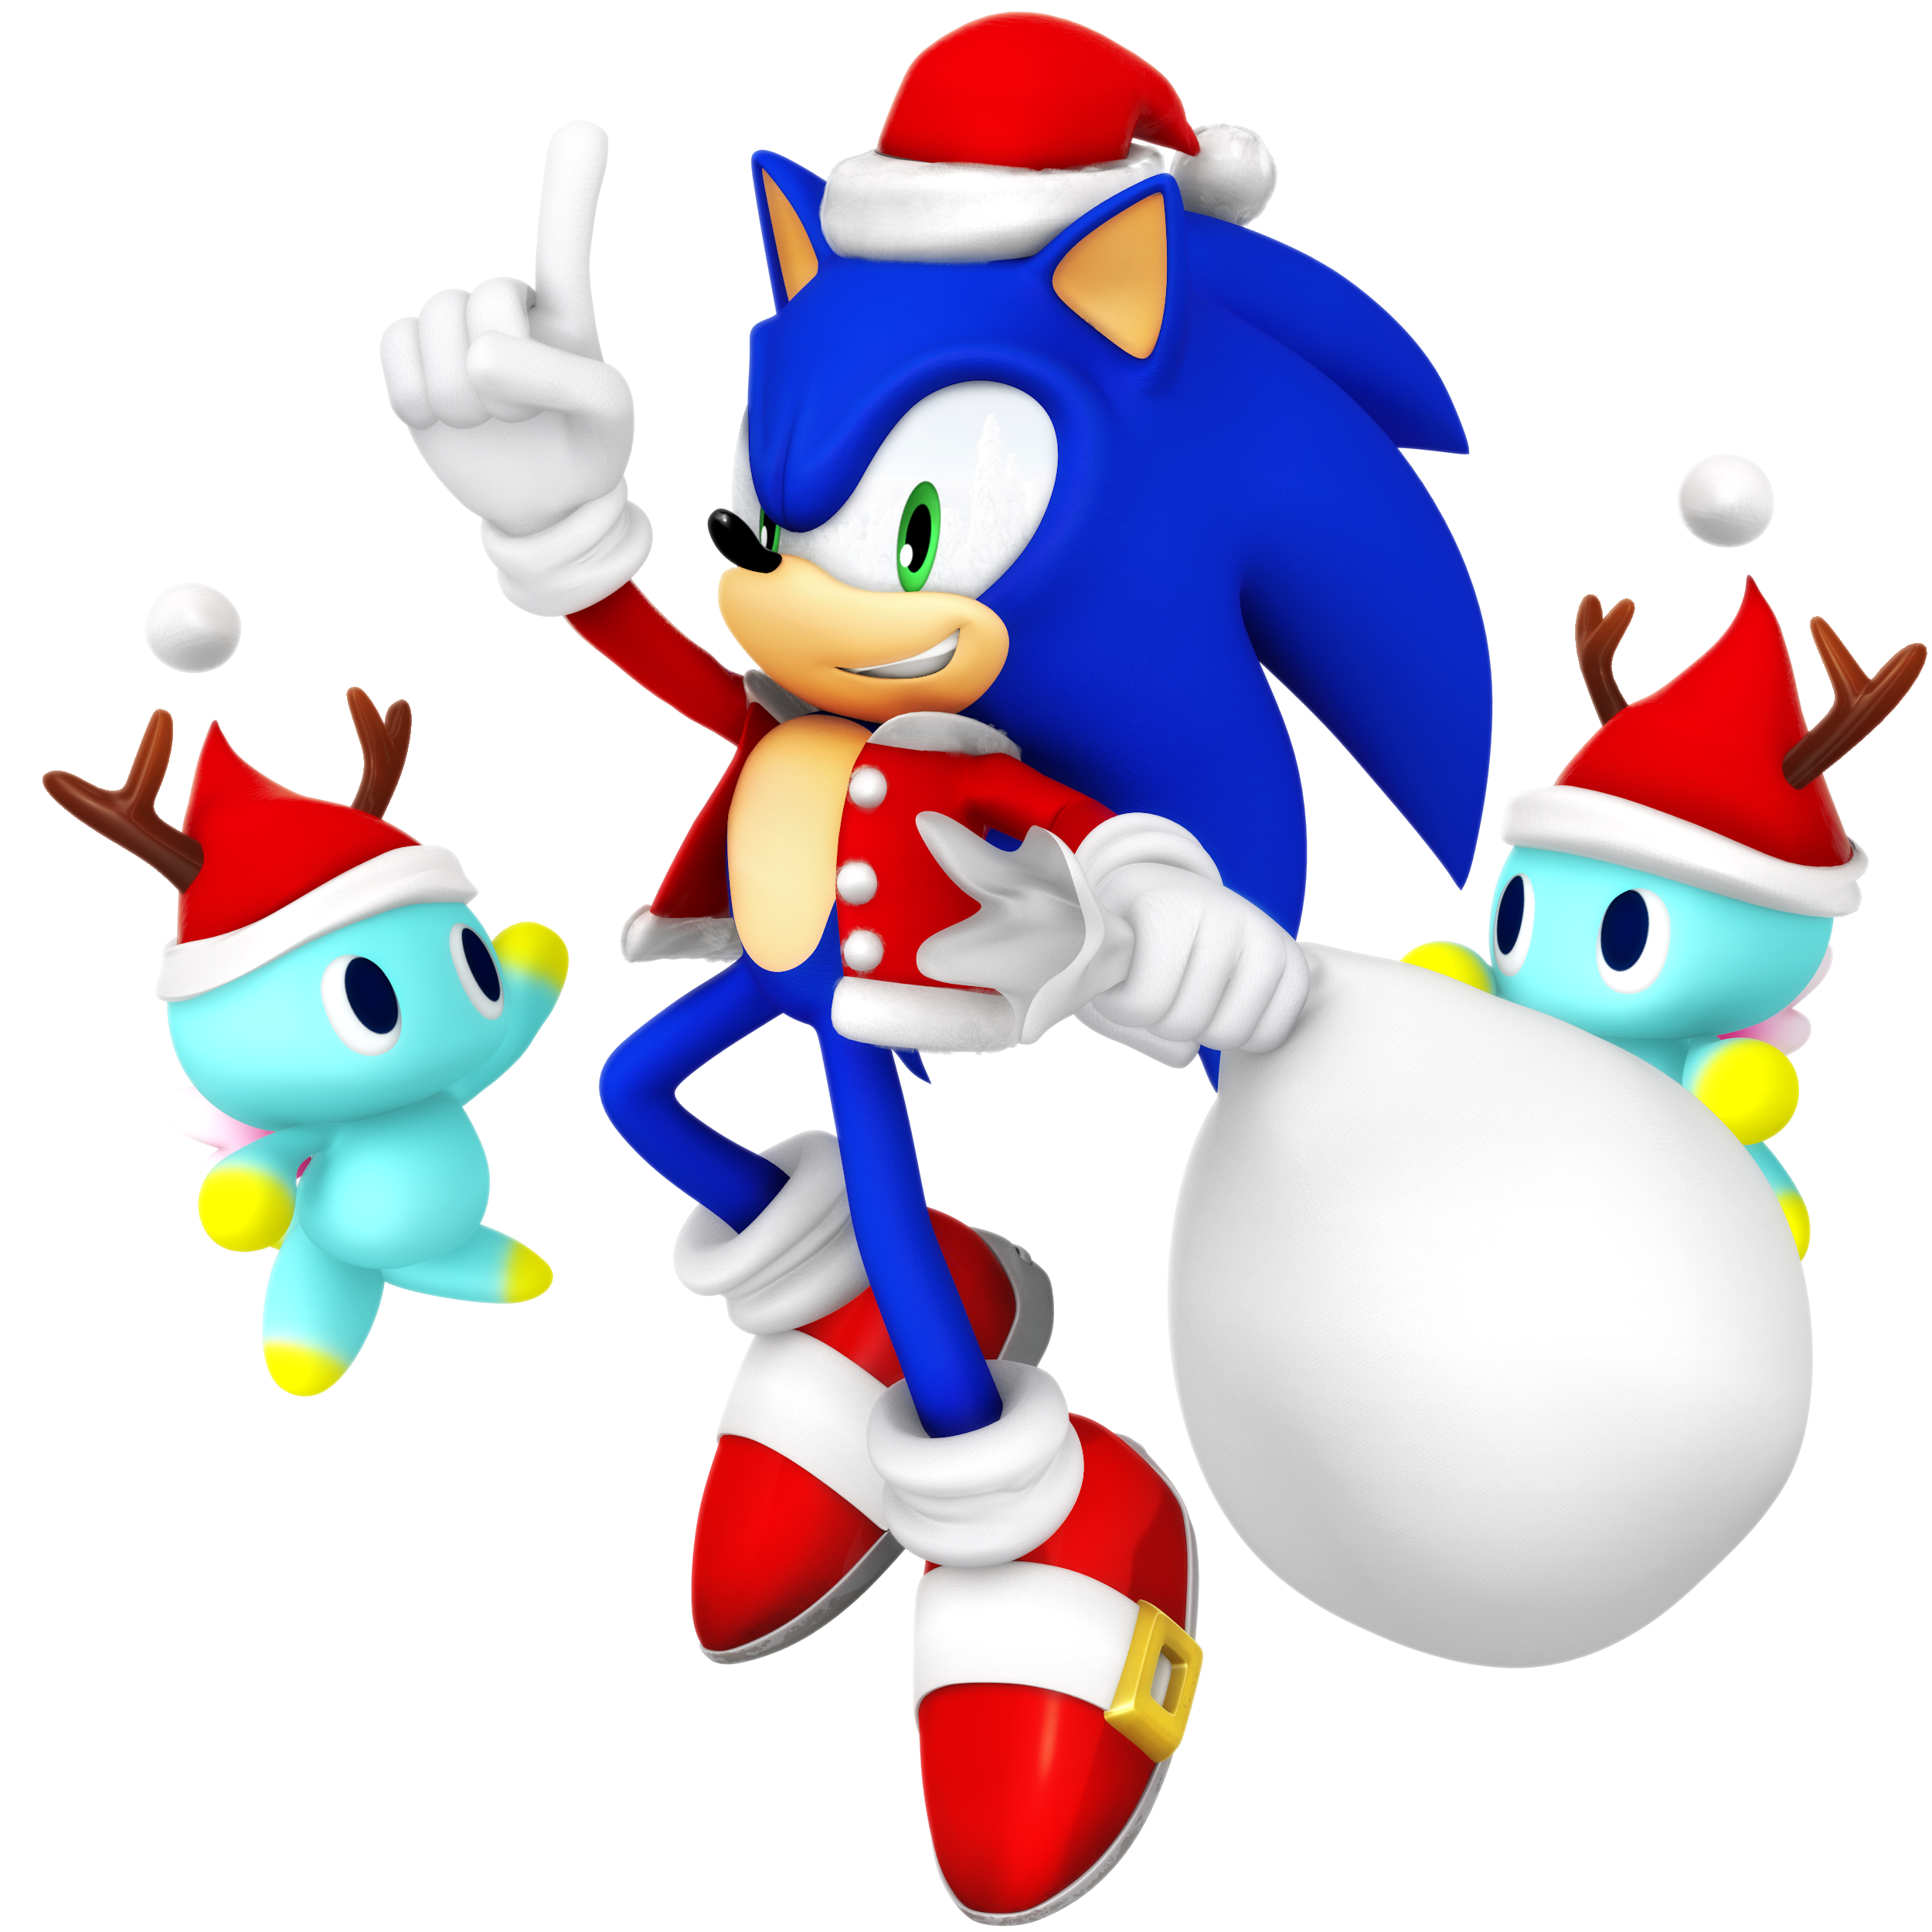 Sonic Chao Render by Nibroc-Rock on DeviantArt